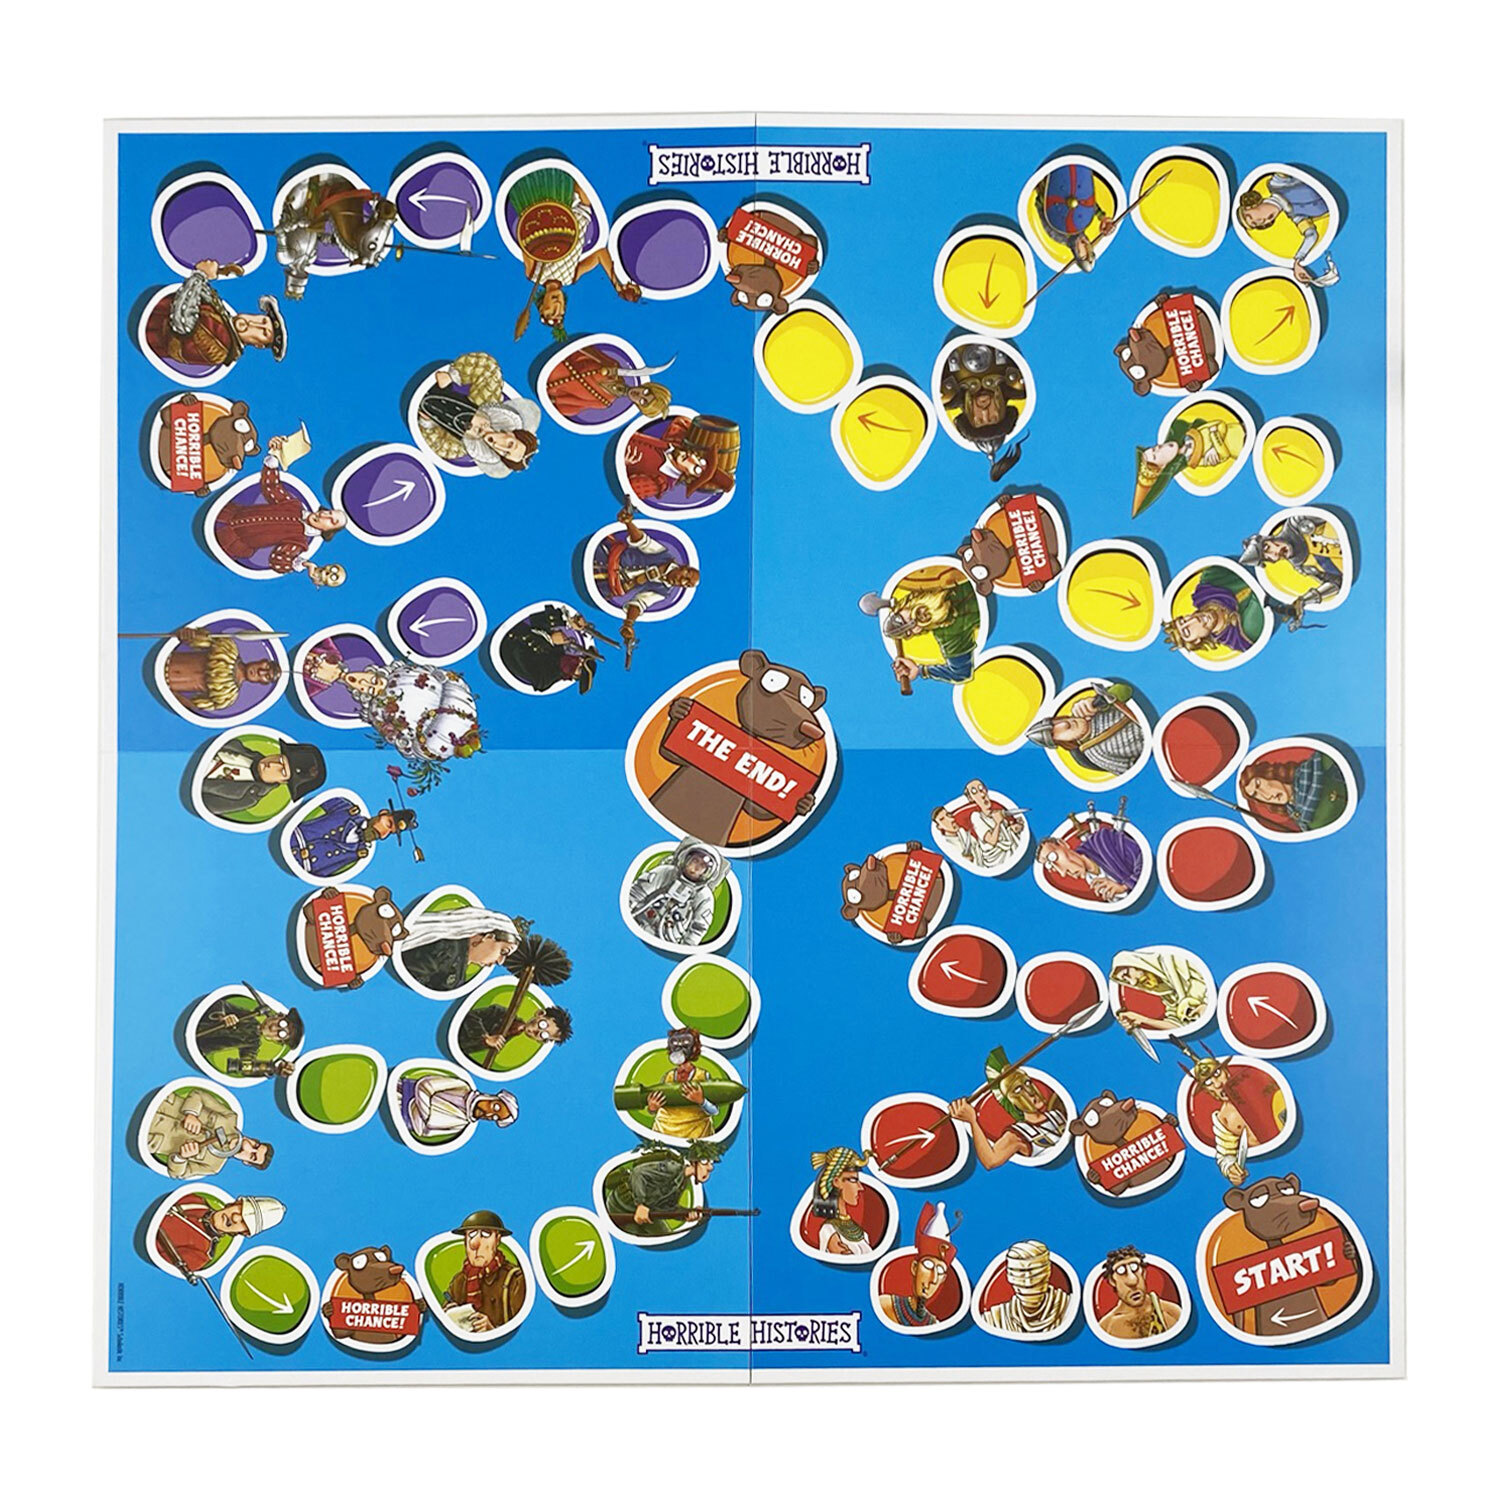 Horrible Histories The Board Game Image 4